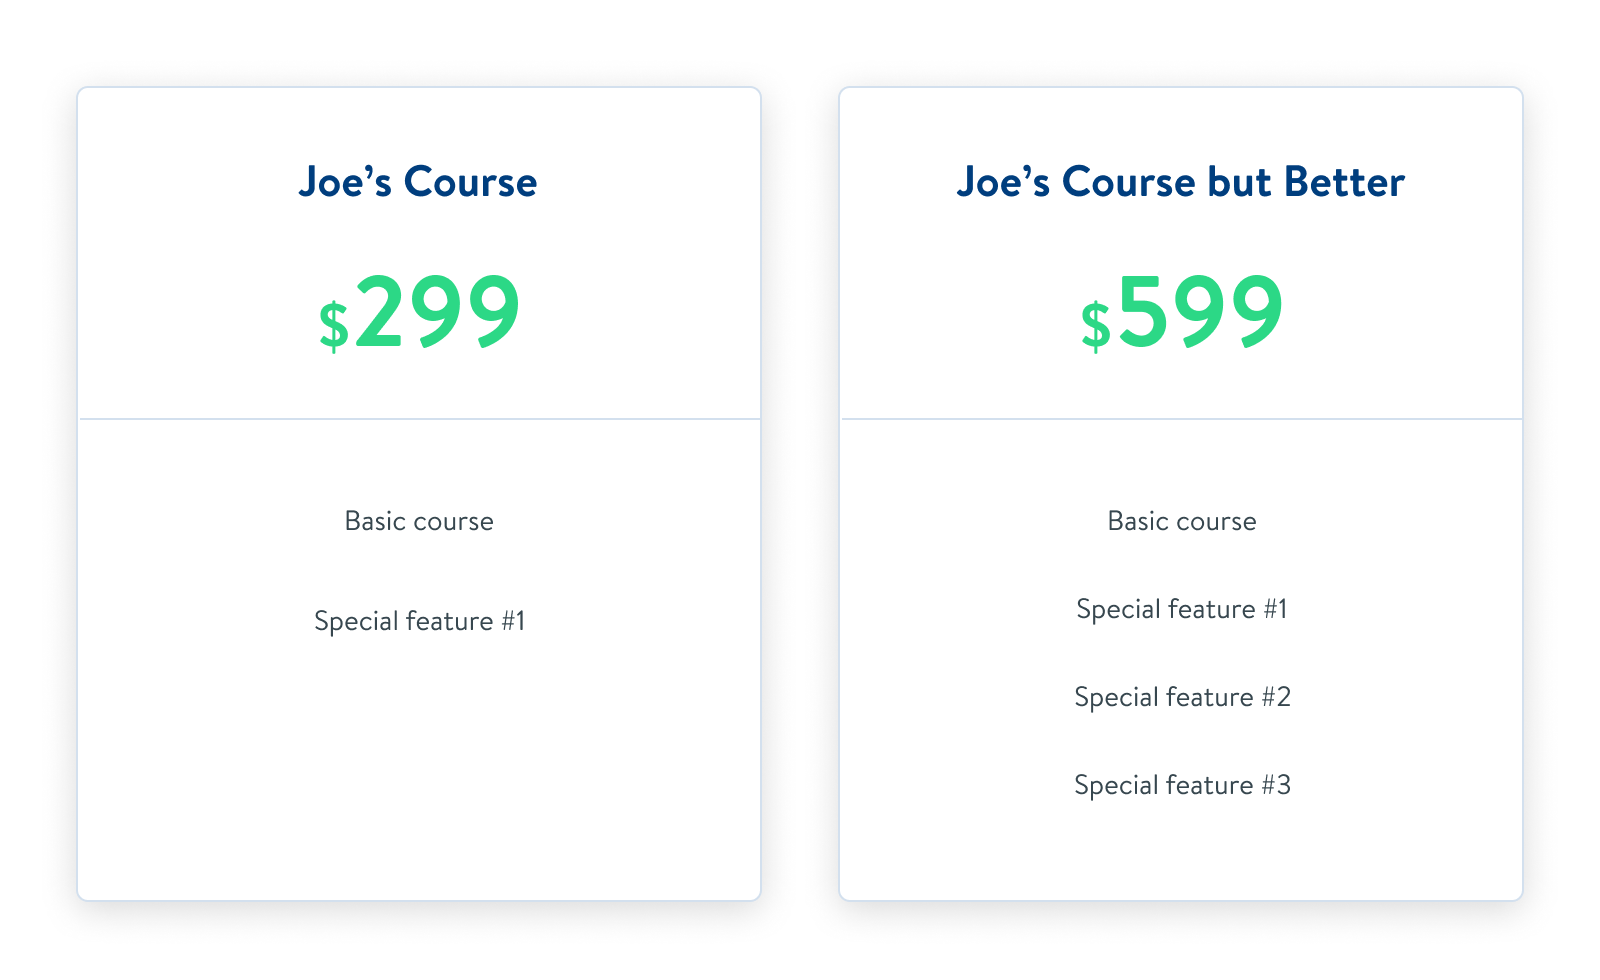 Joe's Course ($299) - Basic Course and 1 Special Feature; vs Joe's Course But Better ($599) - Basic Course and 3 Special Features